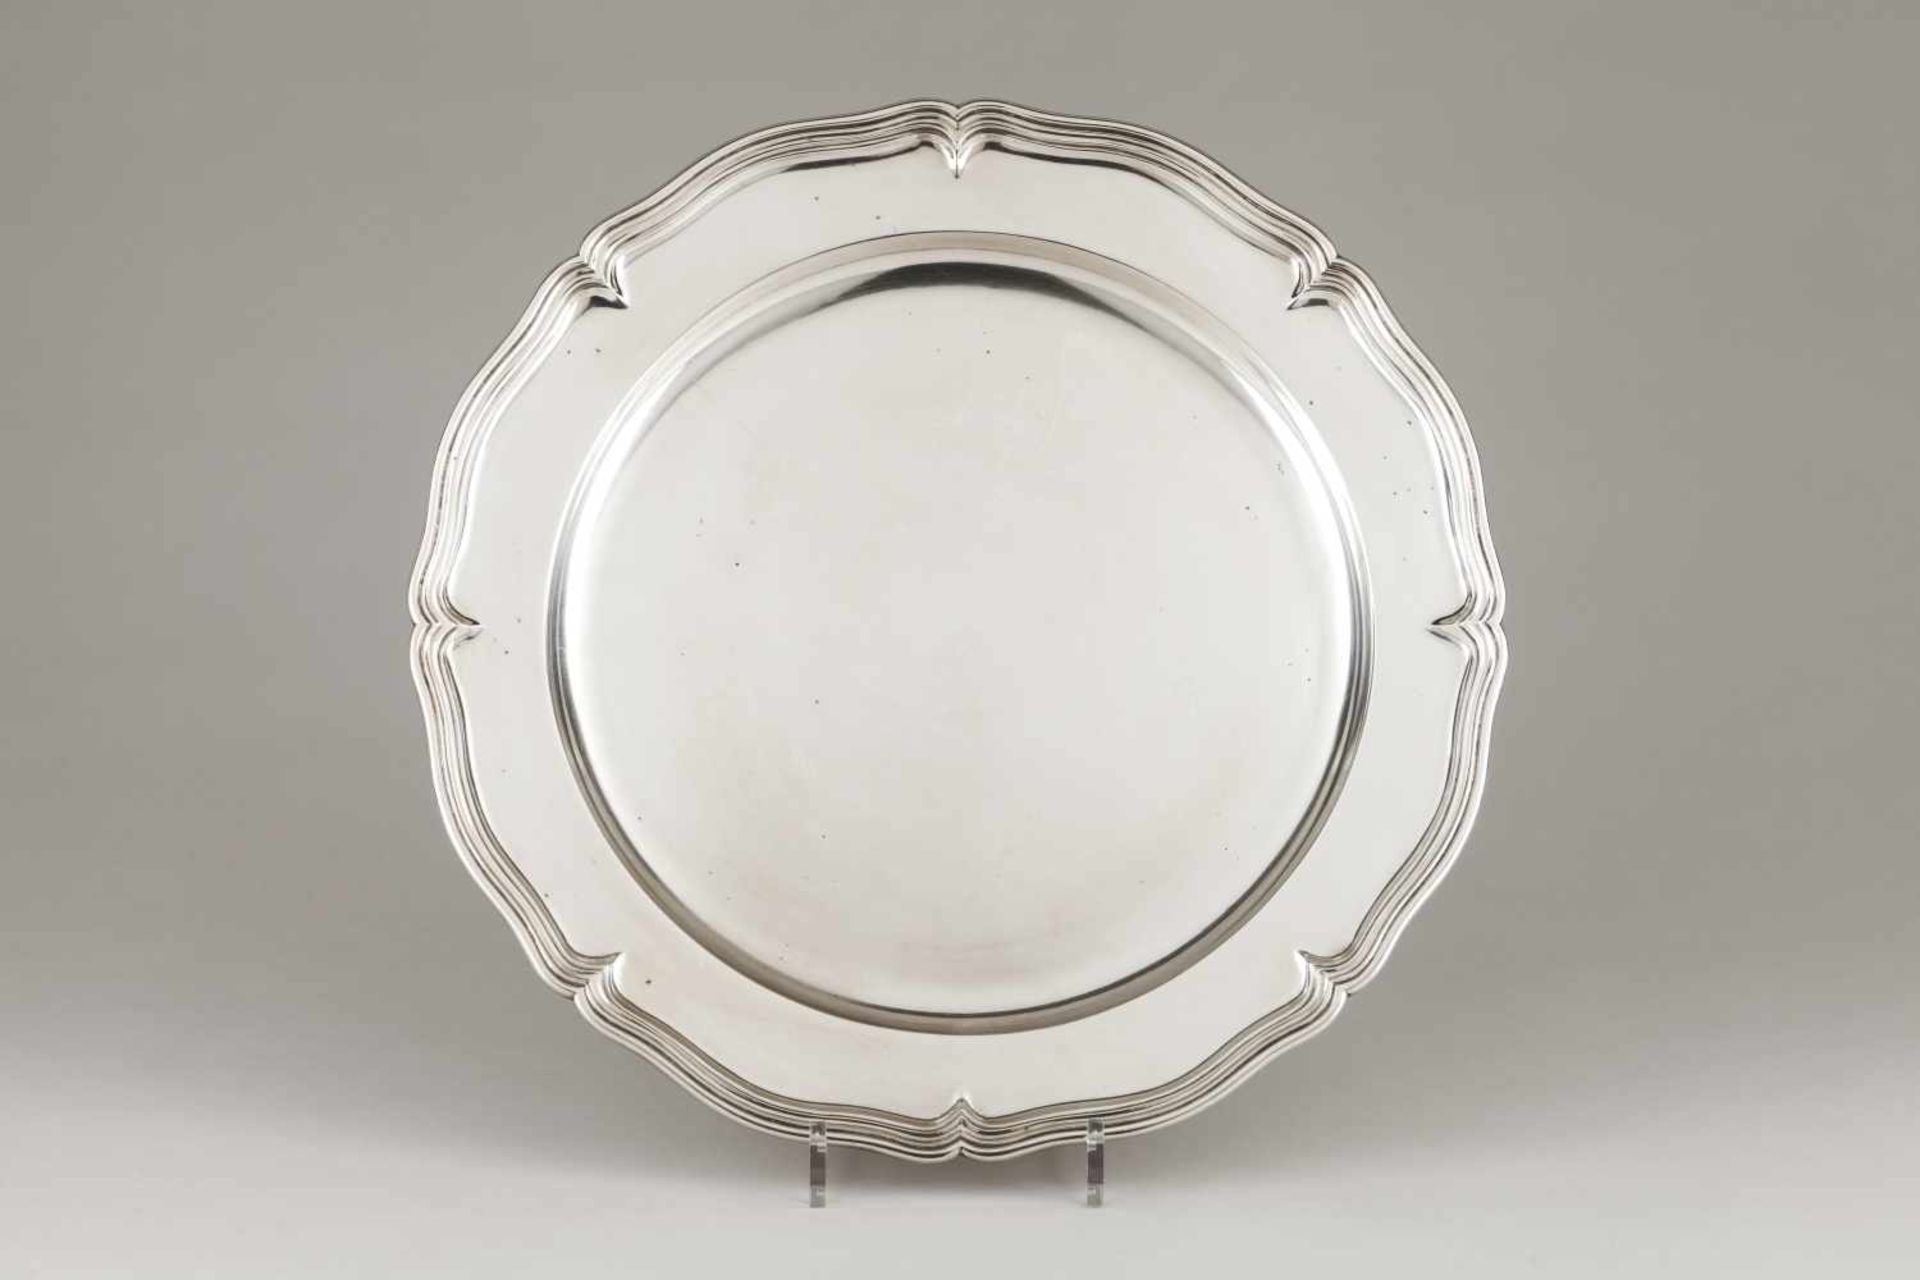 A serving dishPortuguese silverPlain base of grooved lip and scalloped rim with friezeL